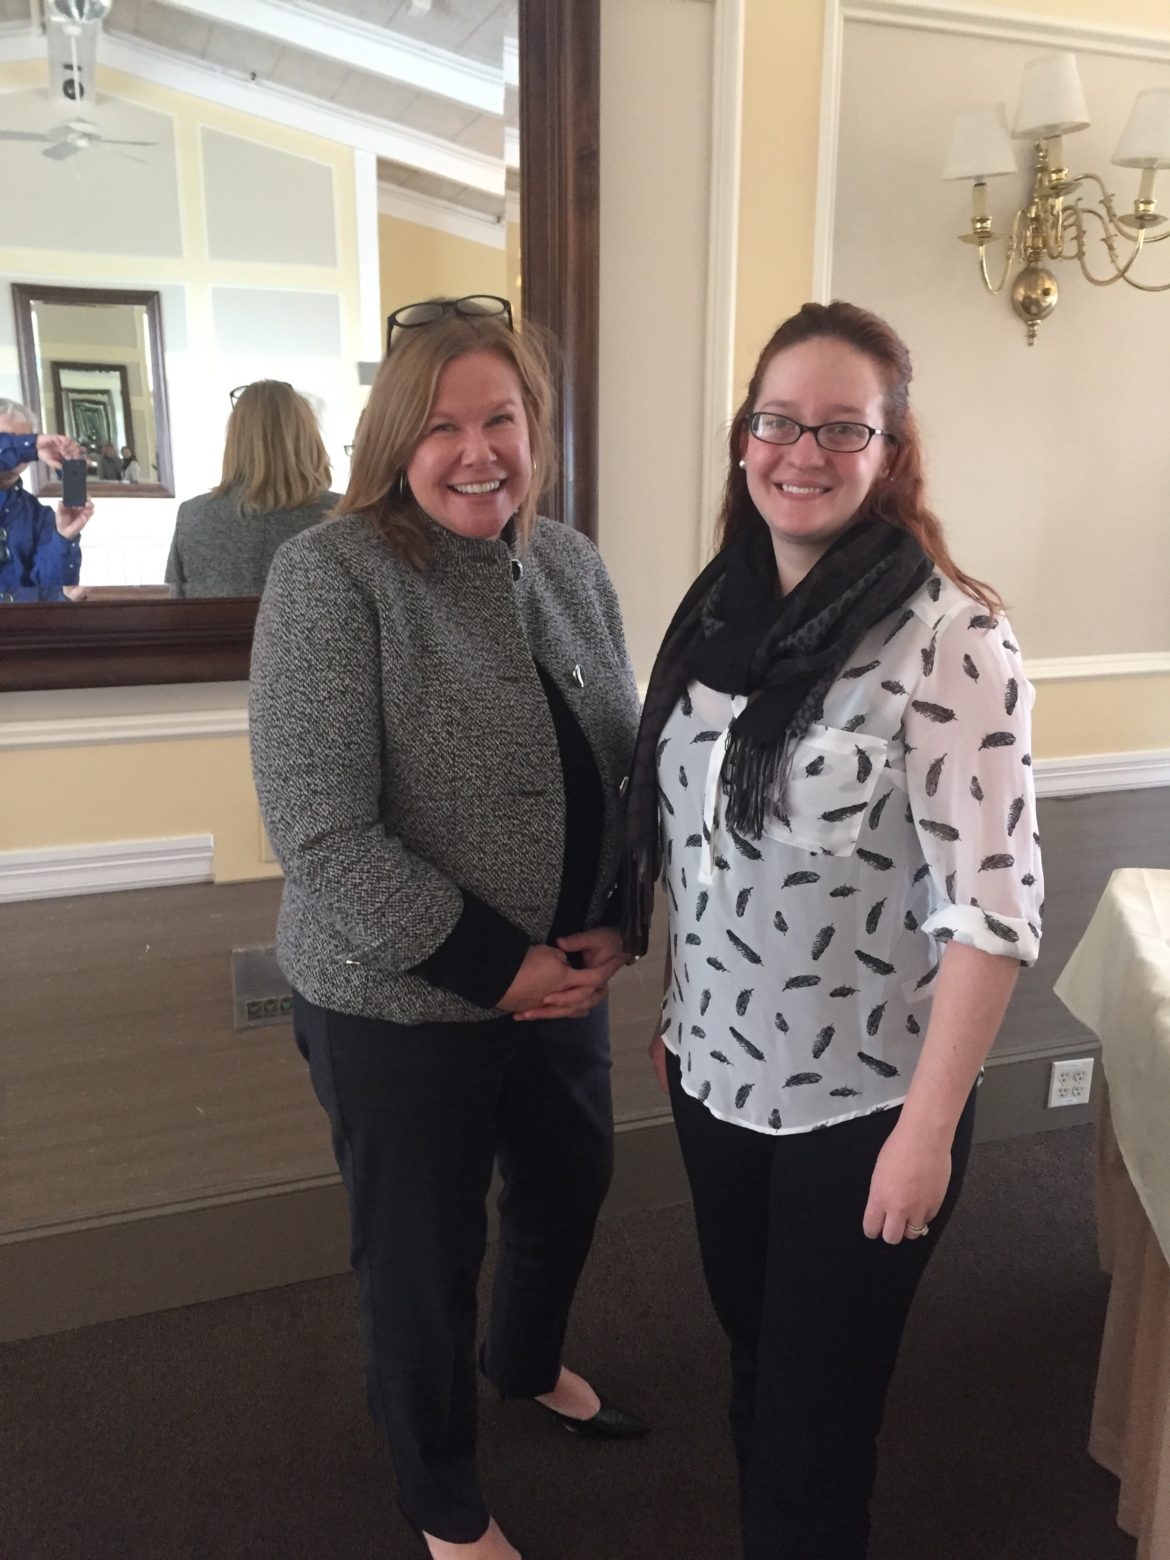 Watertown's Director of Senior Services Anne-Marie Gagnon is pictured with Lilia Wisfeldt, the President of the Rotary Club of Watertown, at a recent meeting of the Rotary Club. 